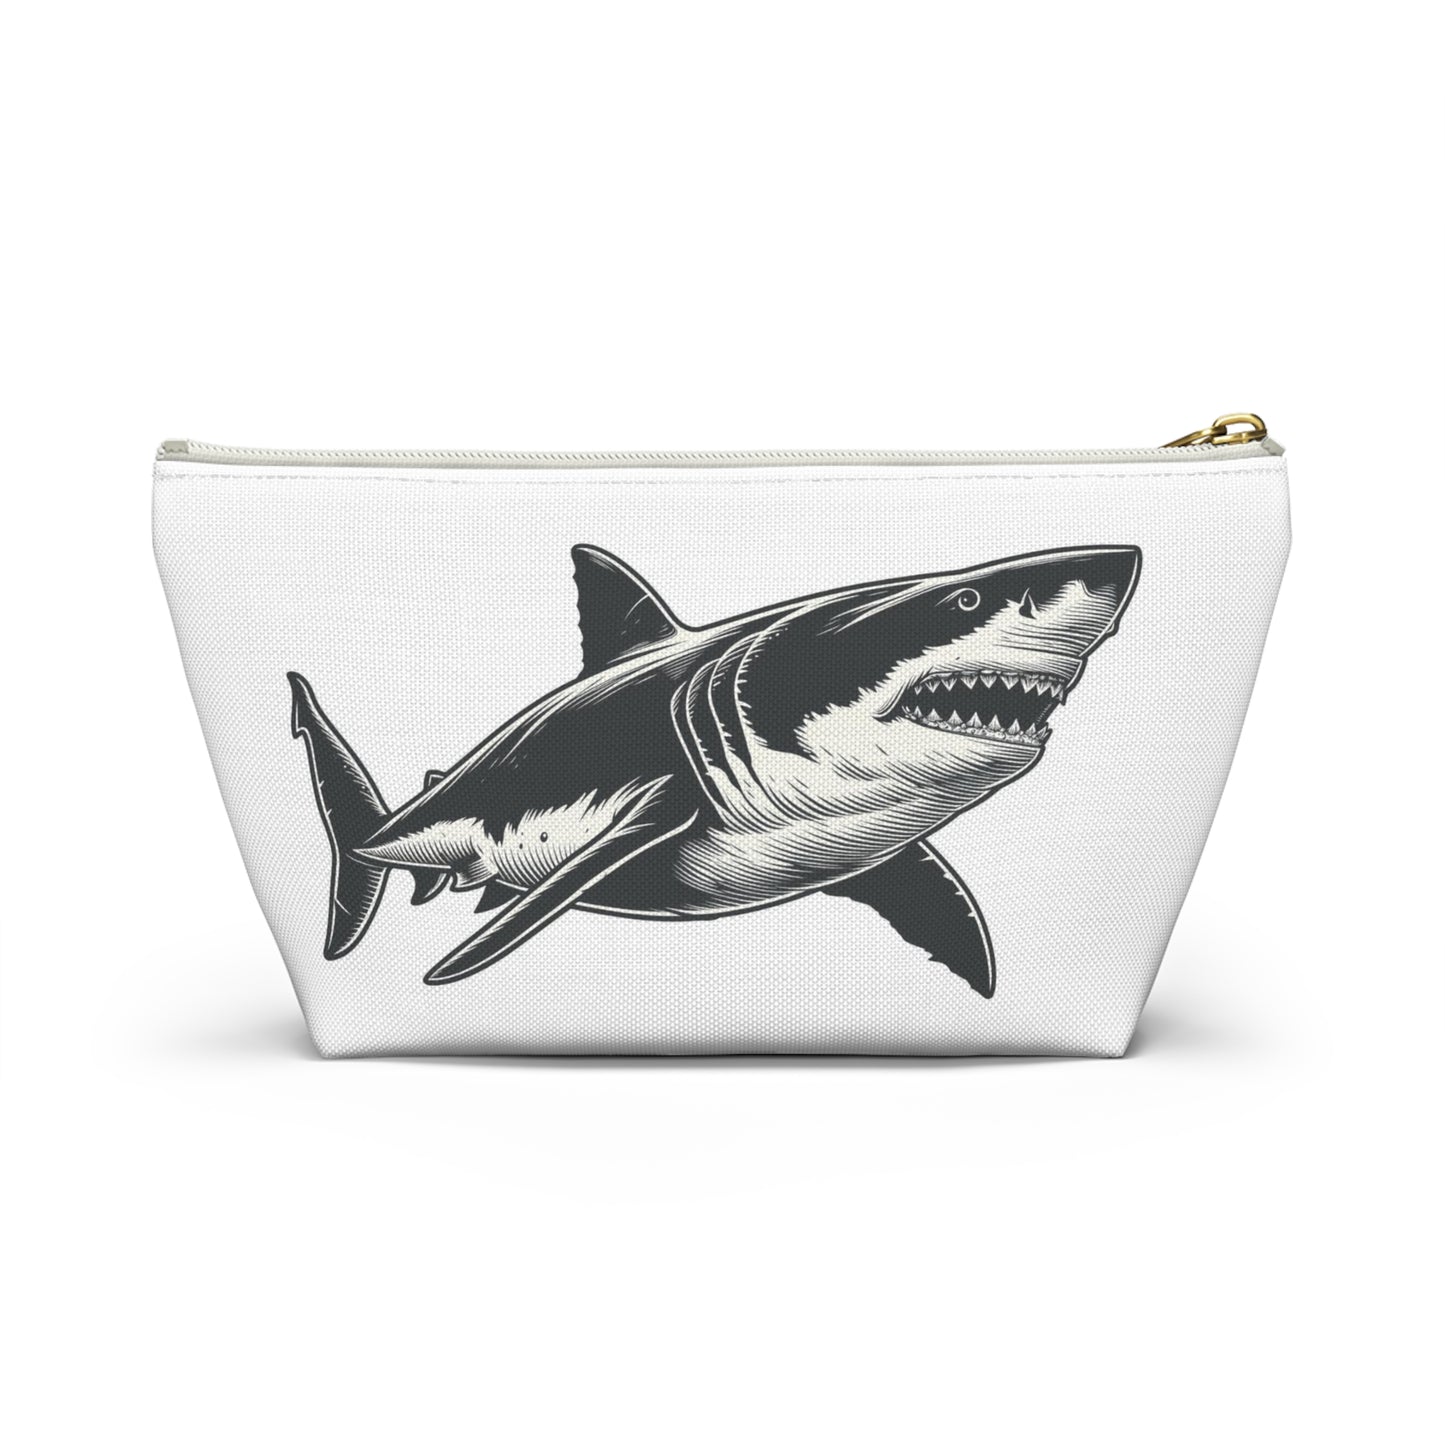 Great White Shark Pouch Bag, Canvas Travel Wash Makeup Toiletry Bath Organizer Pencil Zip Cosmetic Gift Accessory Large Small Zipper